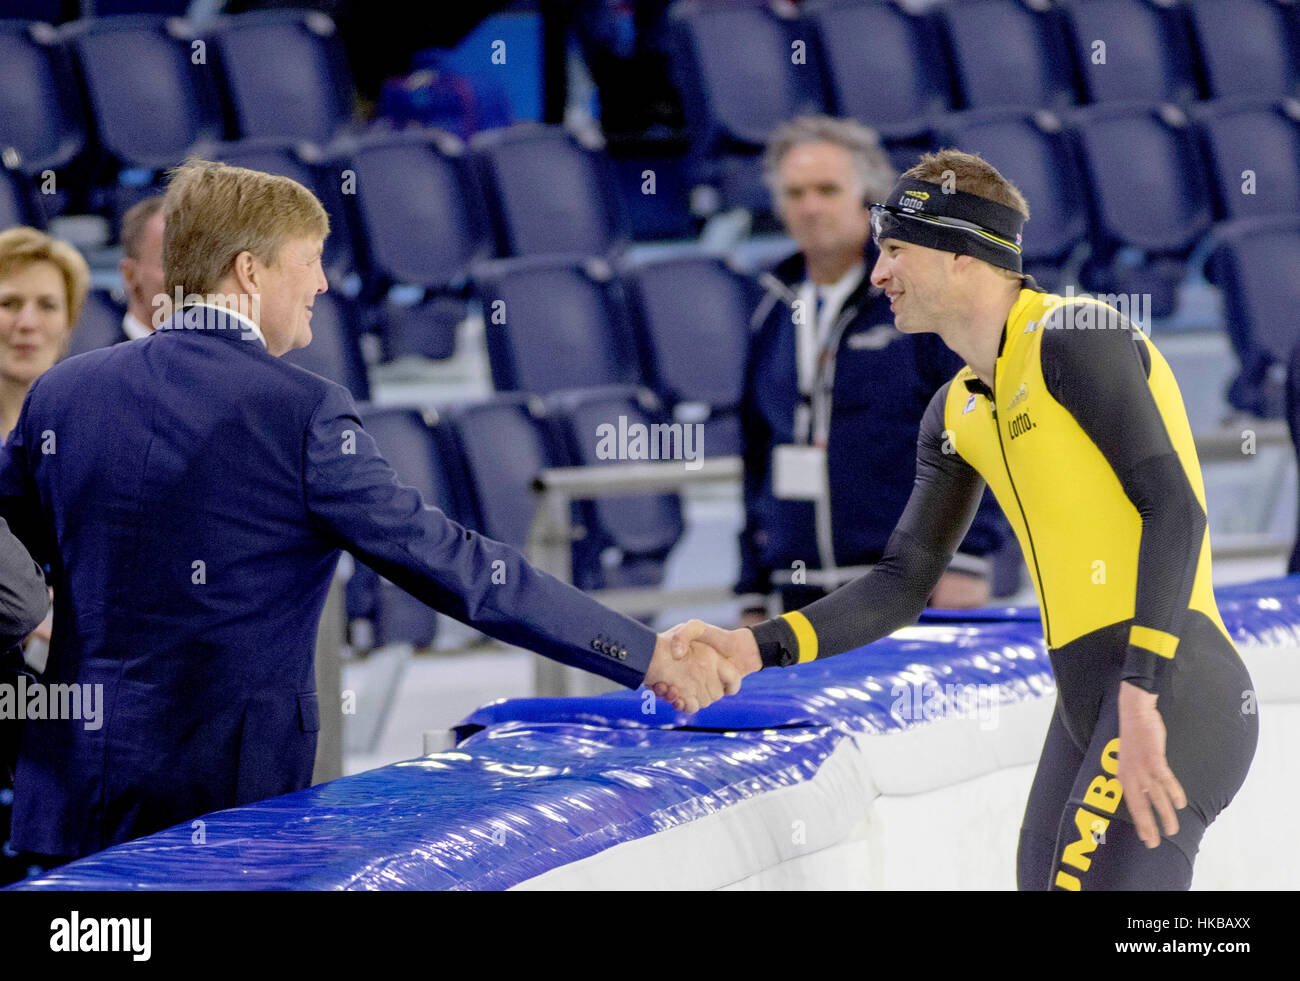 Heerenveen, The Netherlands. 27th January 2017. HM King Willem Alexander of  the Netherlands and Sven Kramer at the renewed Thialf in Heerenveen, on  January 27, 2017, The King will perform the opening